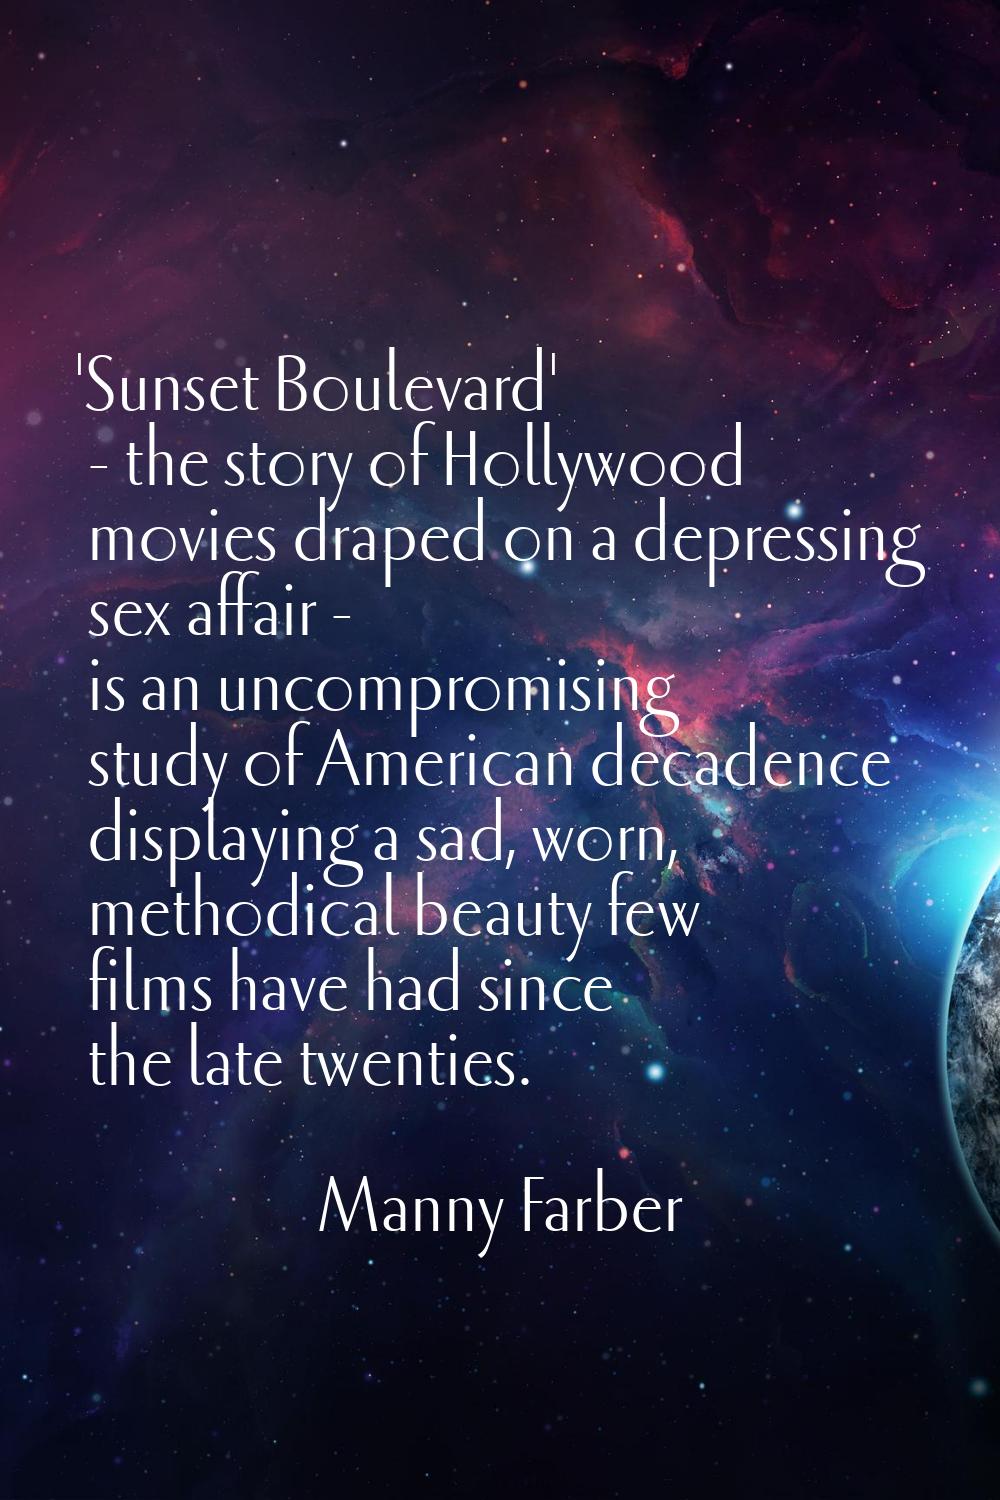 'Sunset Boulevard' - the story of Hollywood movies draped on a depressing sex affair - is an uncomp